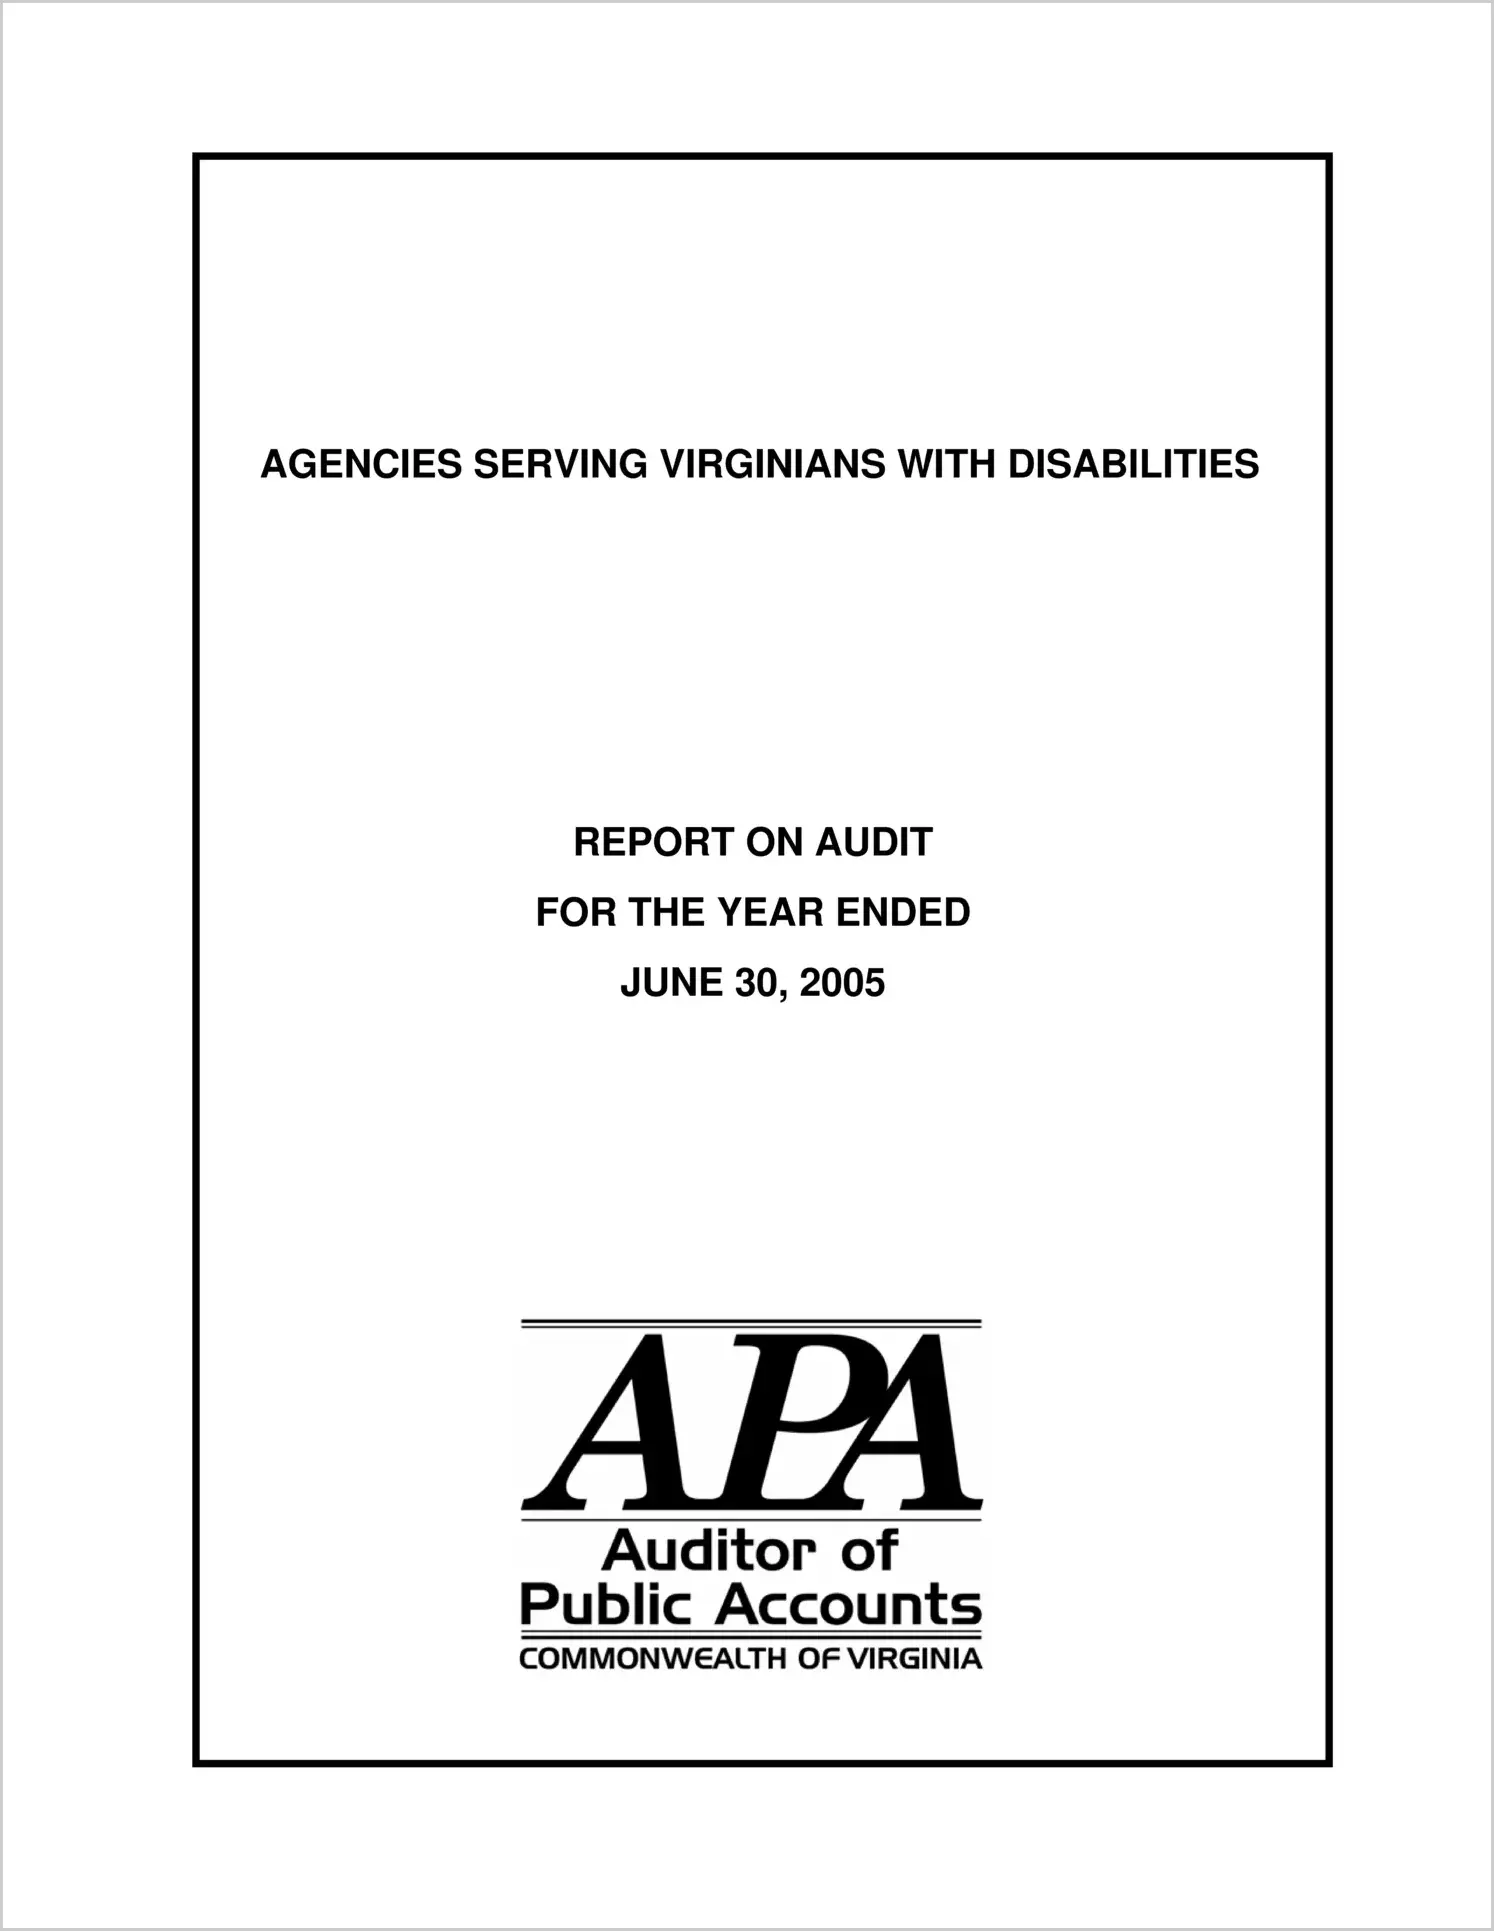 Agencies Serving Virginians with Disabilities for the year ended June 30, 2005